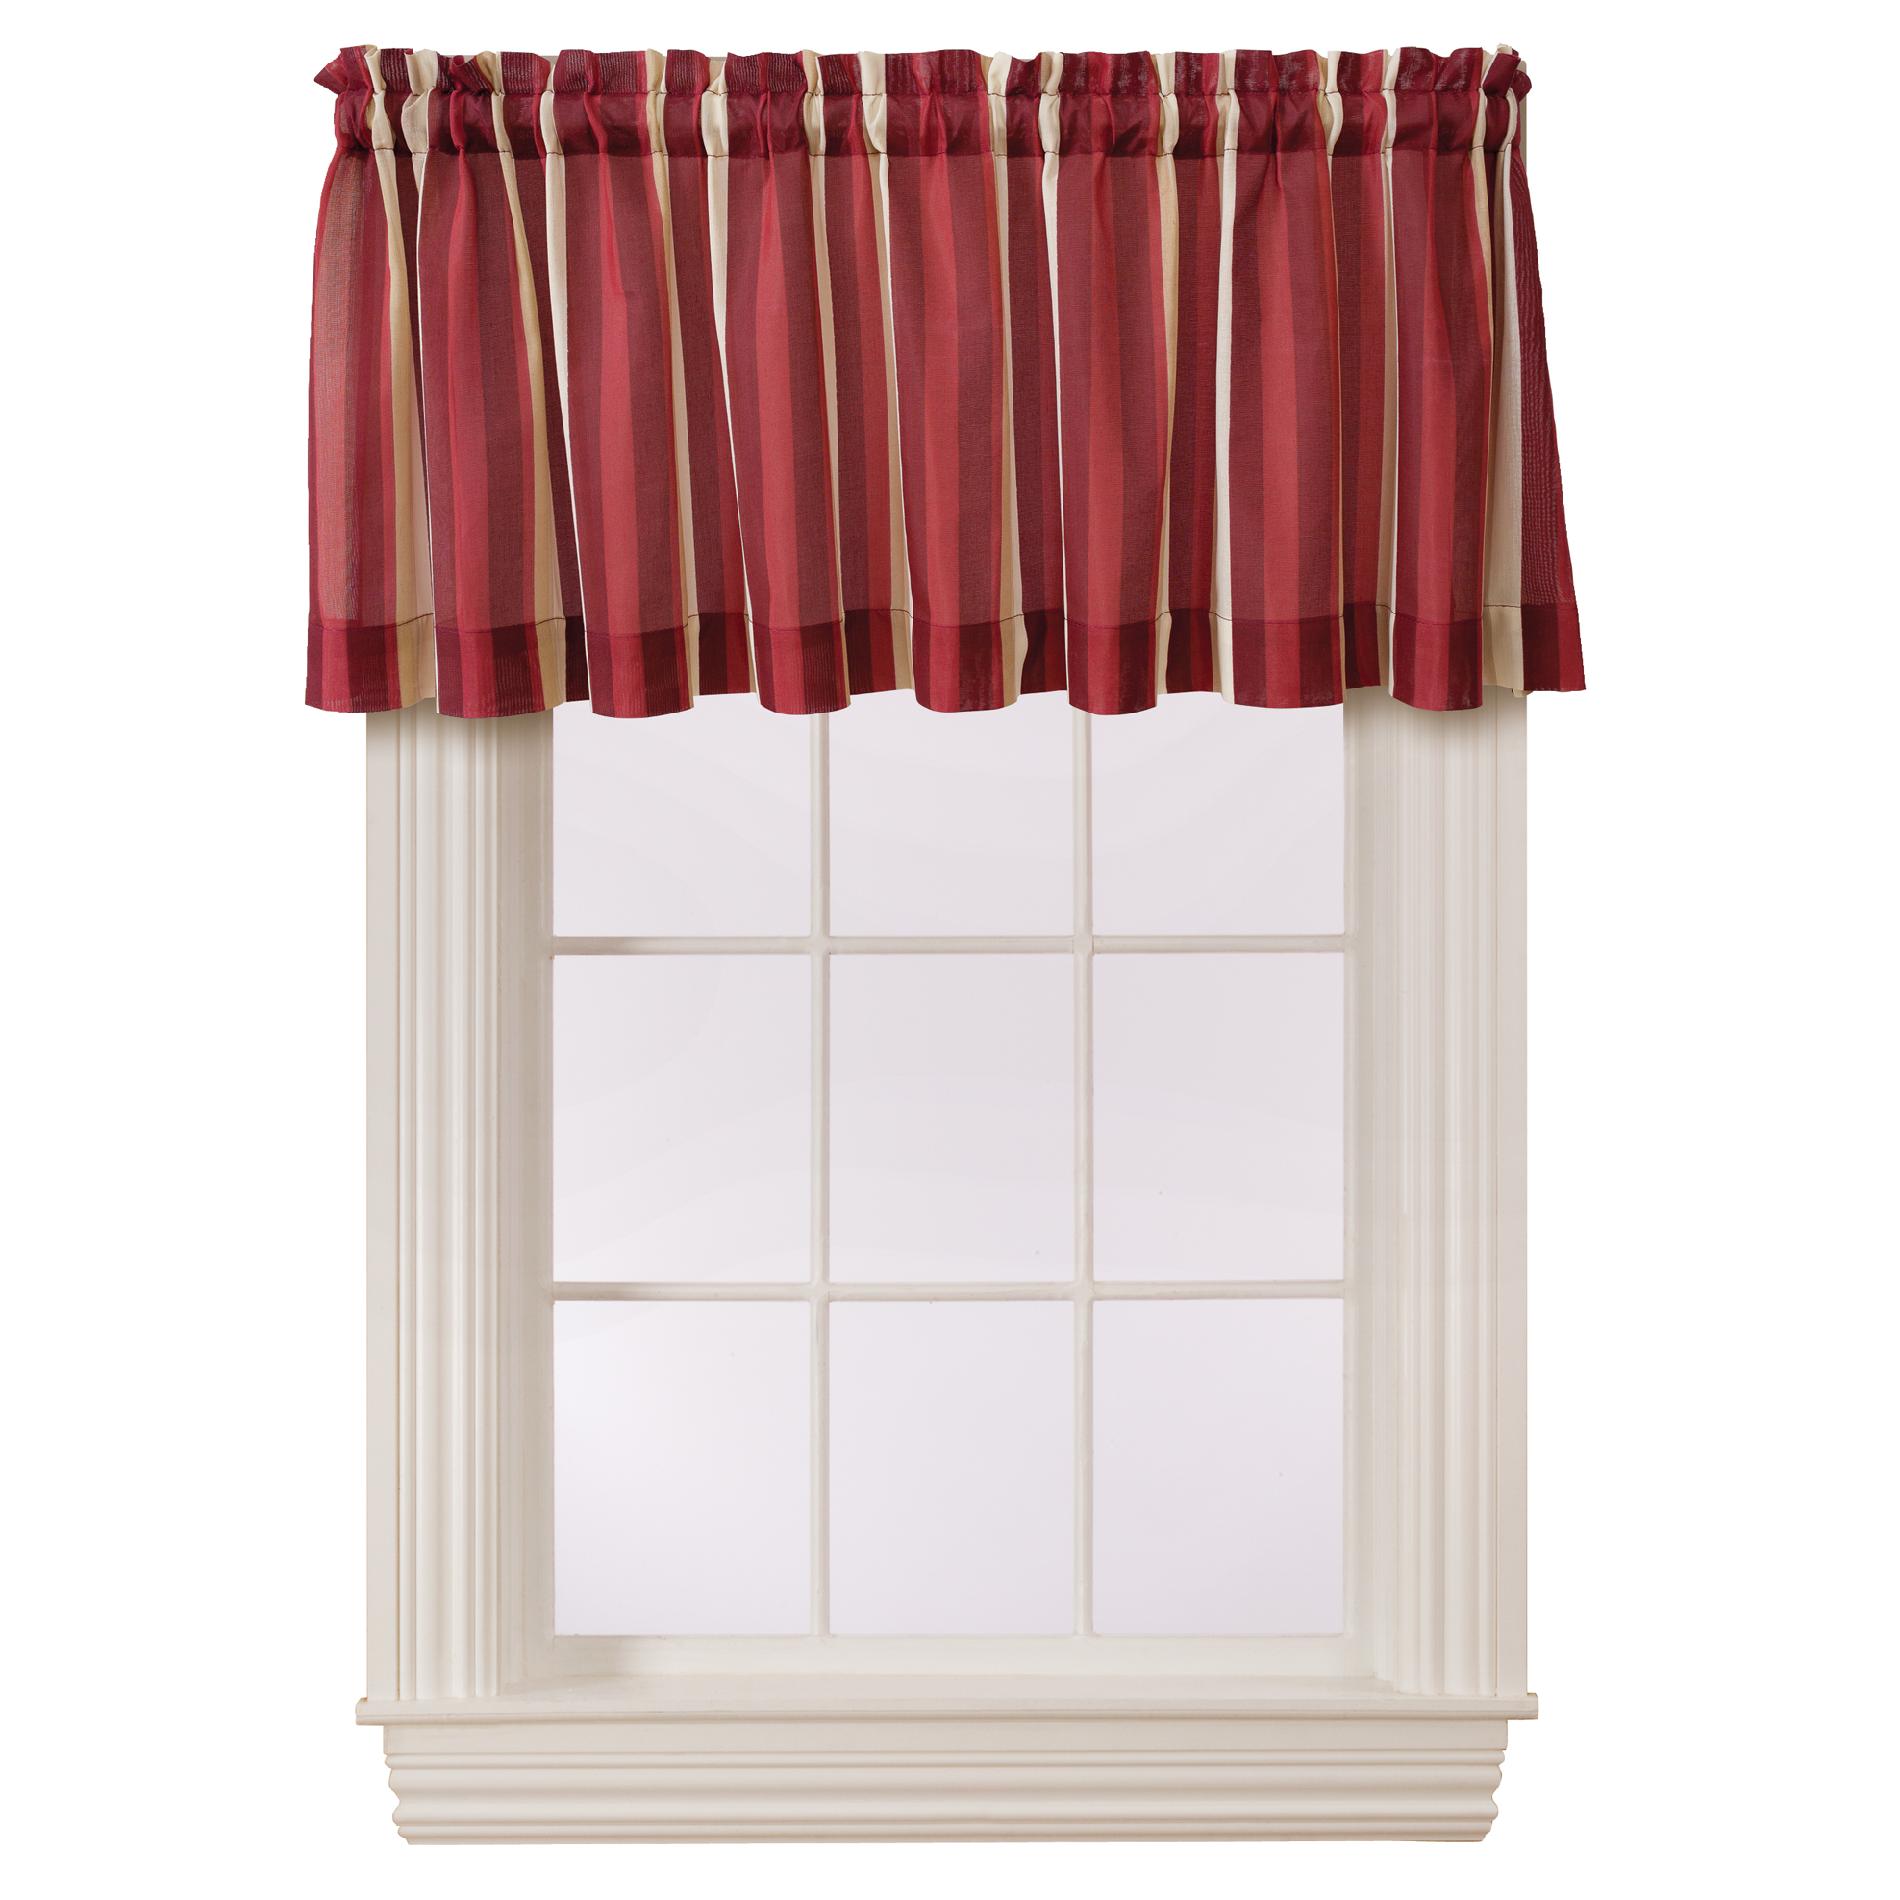 Long Sheer Curtain Panels Lowe's Curtains and Valances